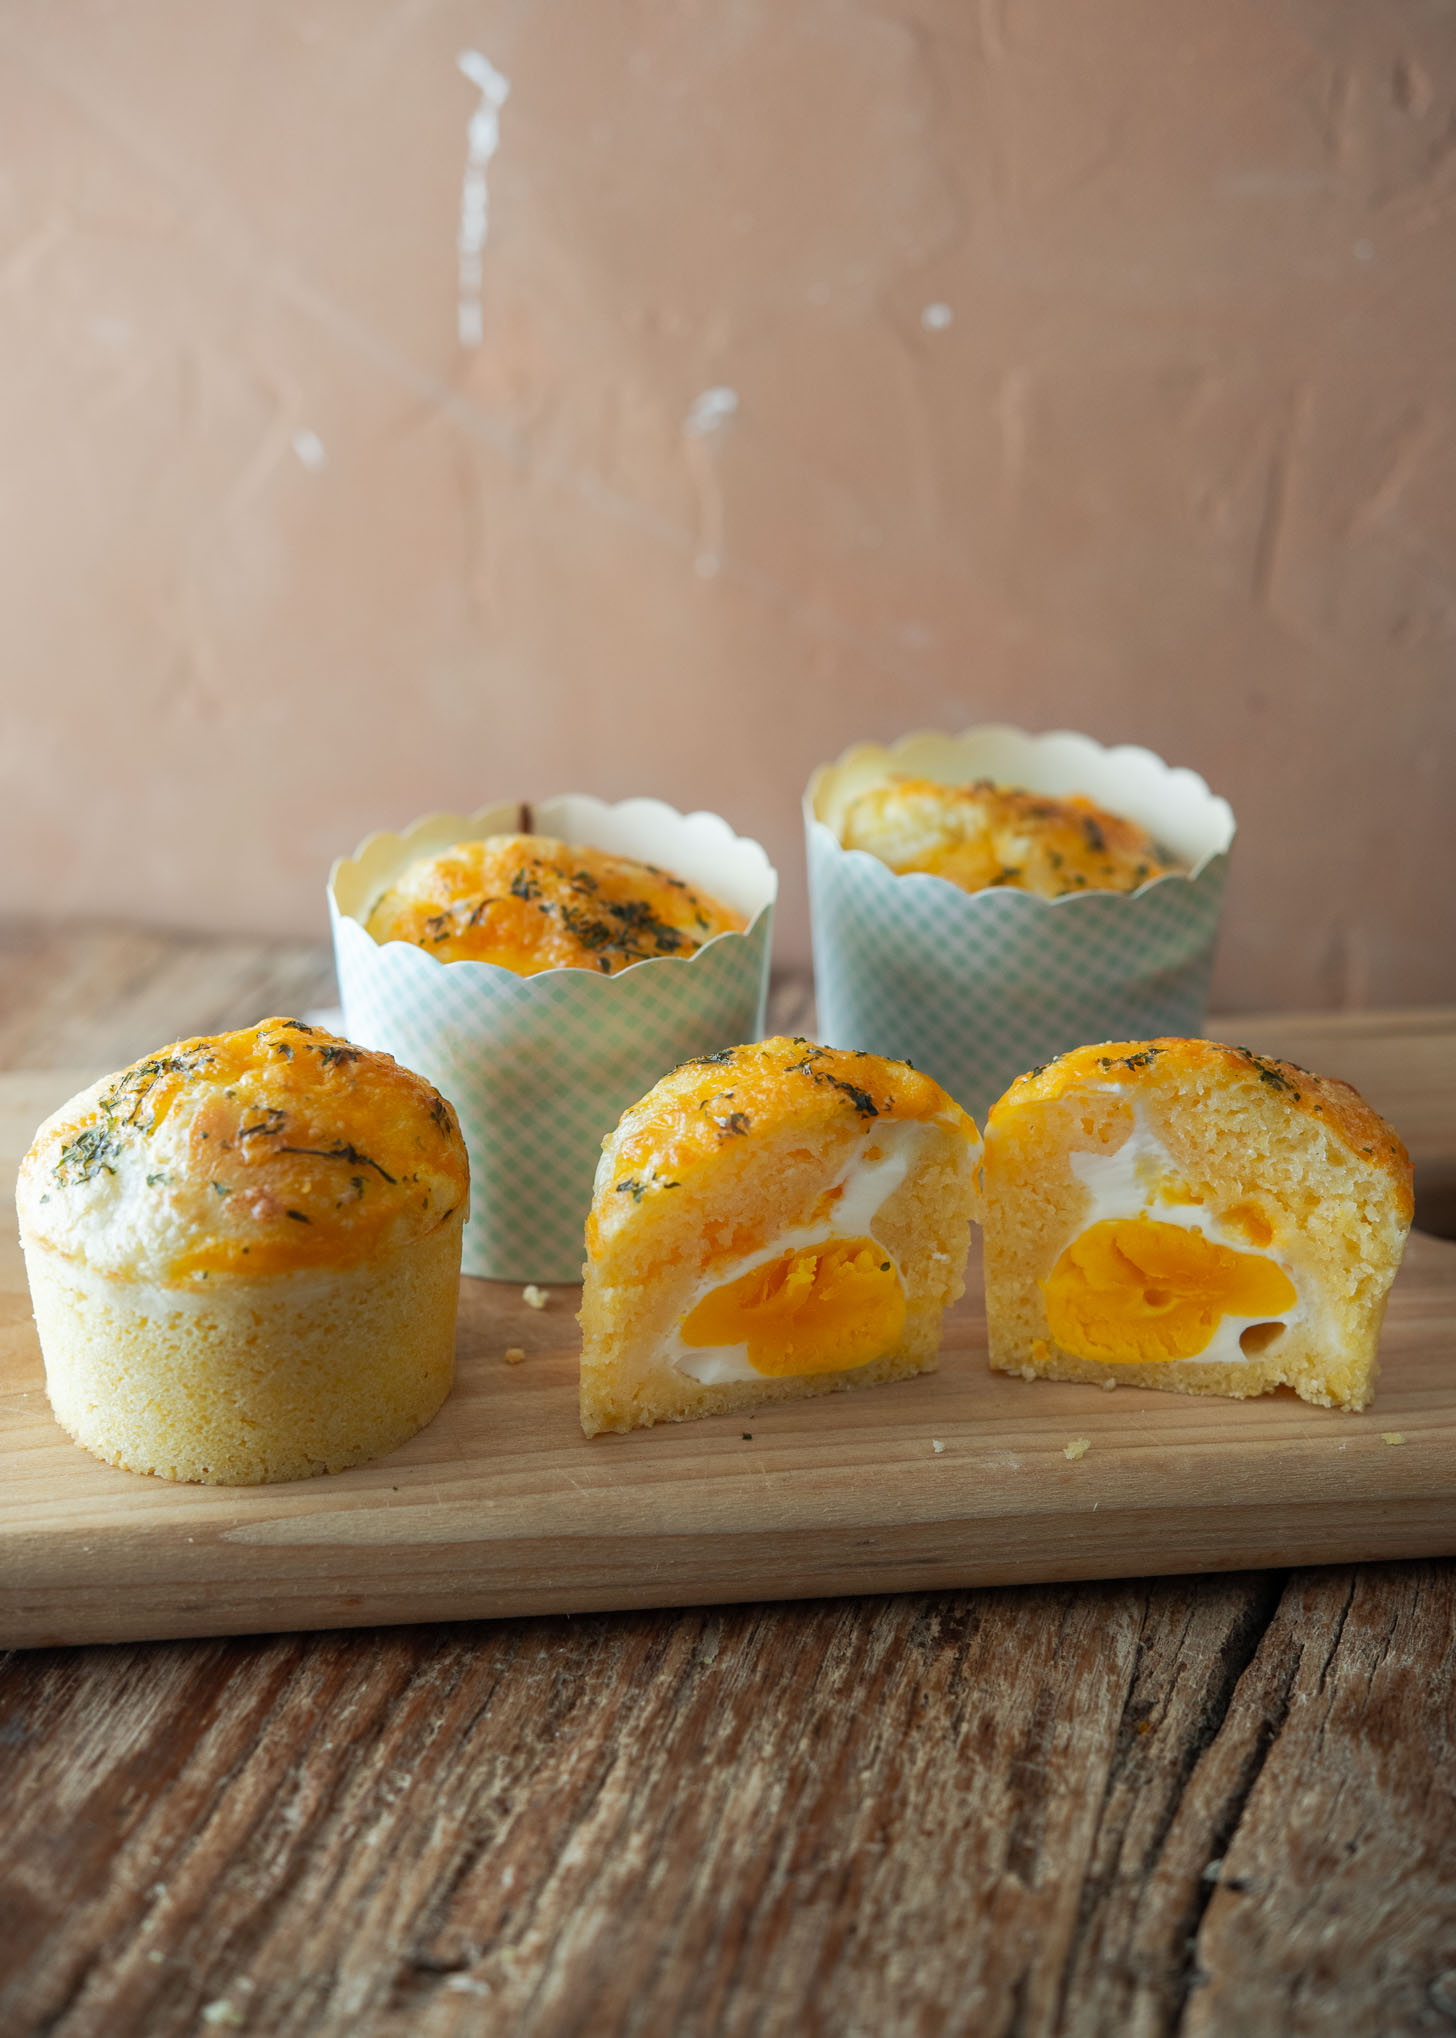 Gyeran ppang with cooked egg inside the muffin.